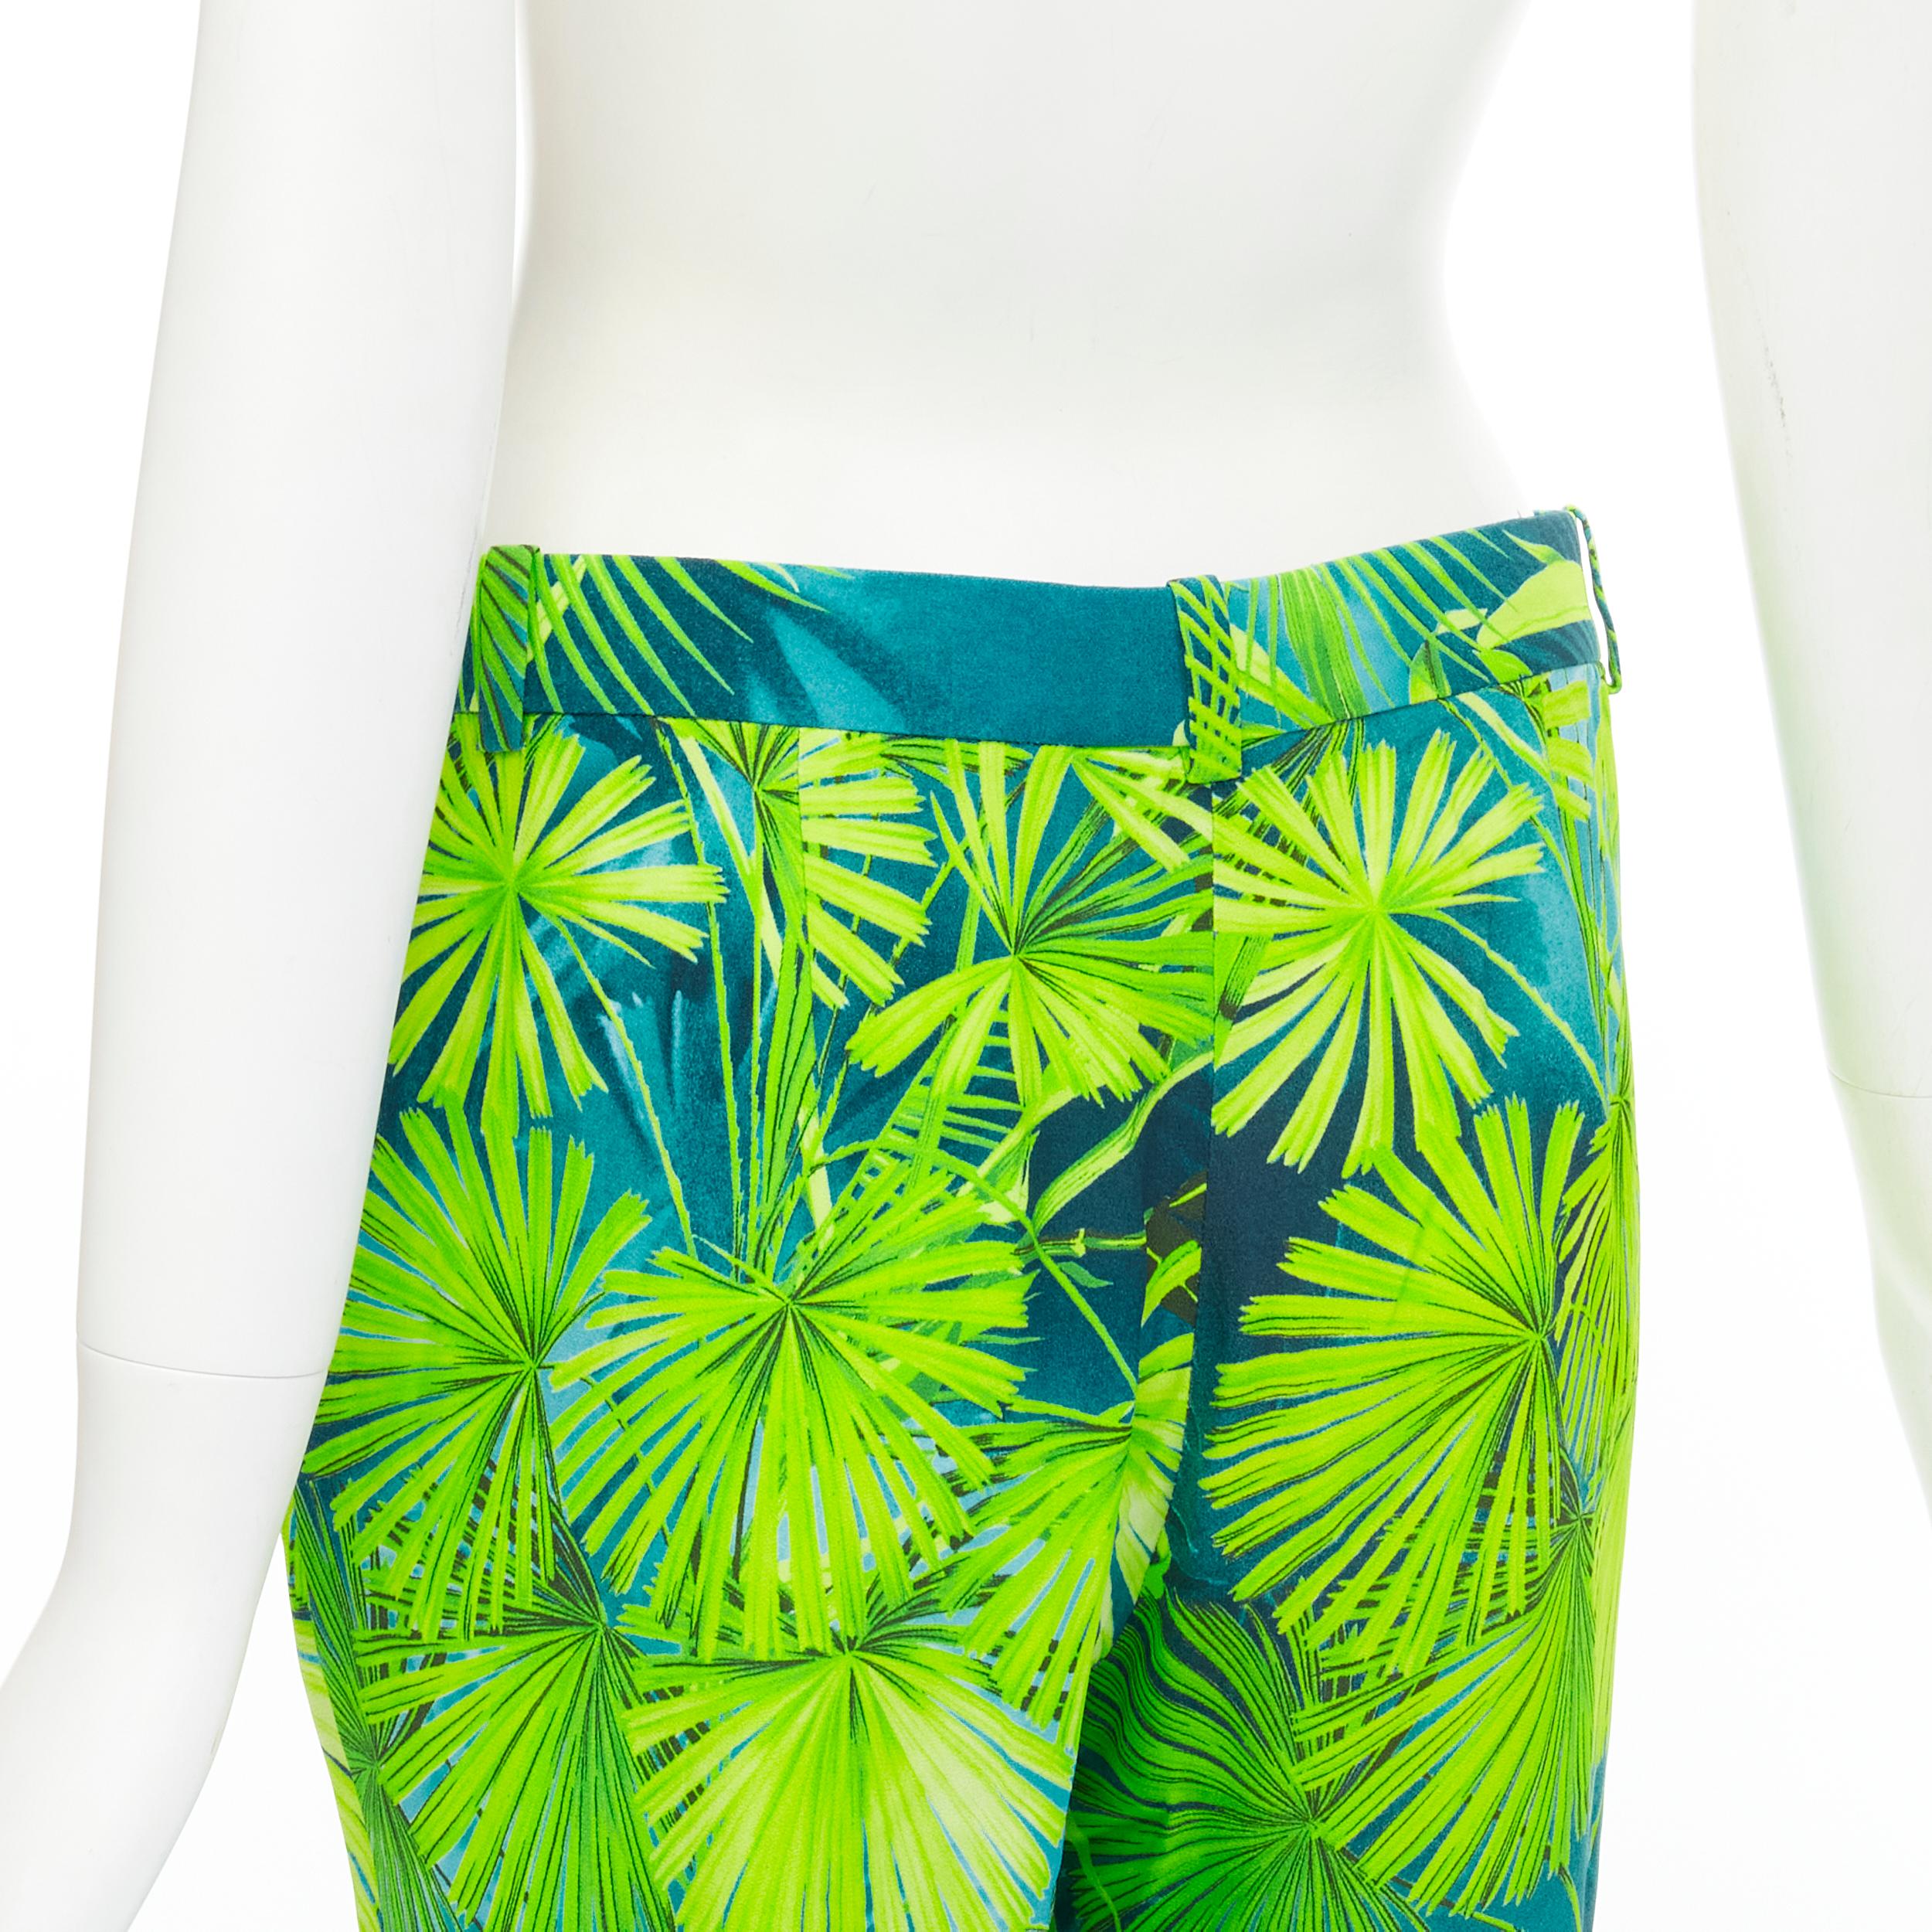 new VERSACE 2020 Runway Jlo Jungle green tropical print viscose pants IT36 XS 
Reference: TGAS/C01189 
Brand: Versace 
Designer: Donatella Versace 
Collection: 2020 Runway 
As seen on: Jennife Lopez for Campaign 
Material: Viscose 
Color: Green